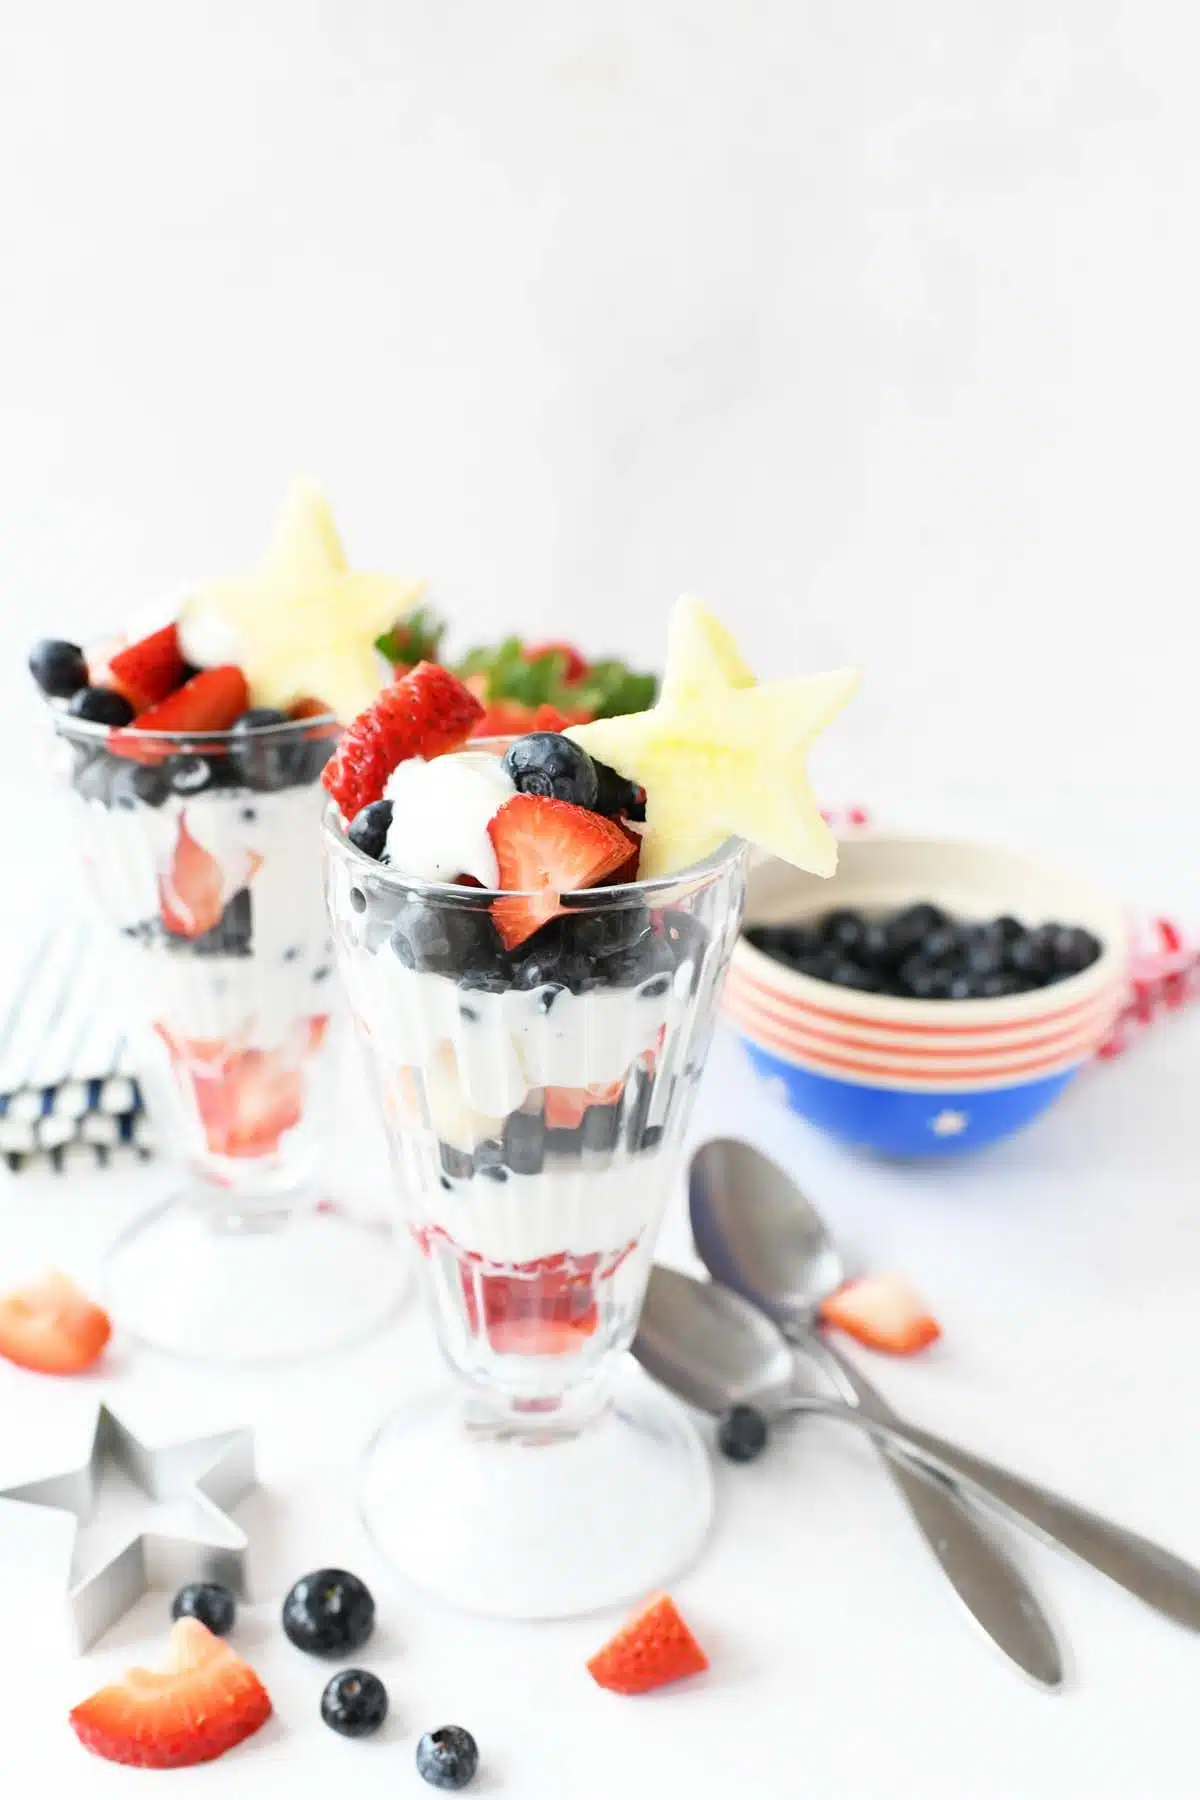 Patriotic Fruit Parfaits with berries, and apple star toppers.